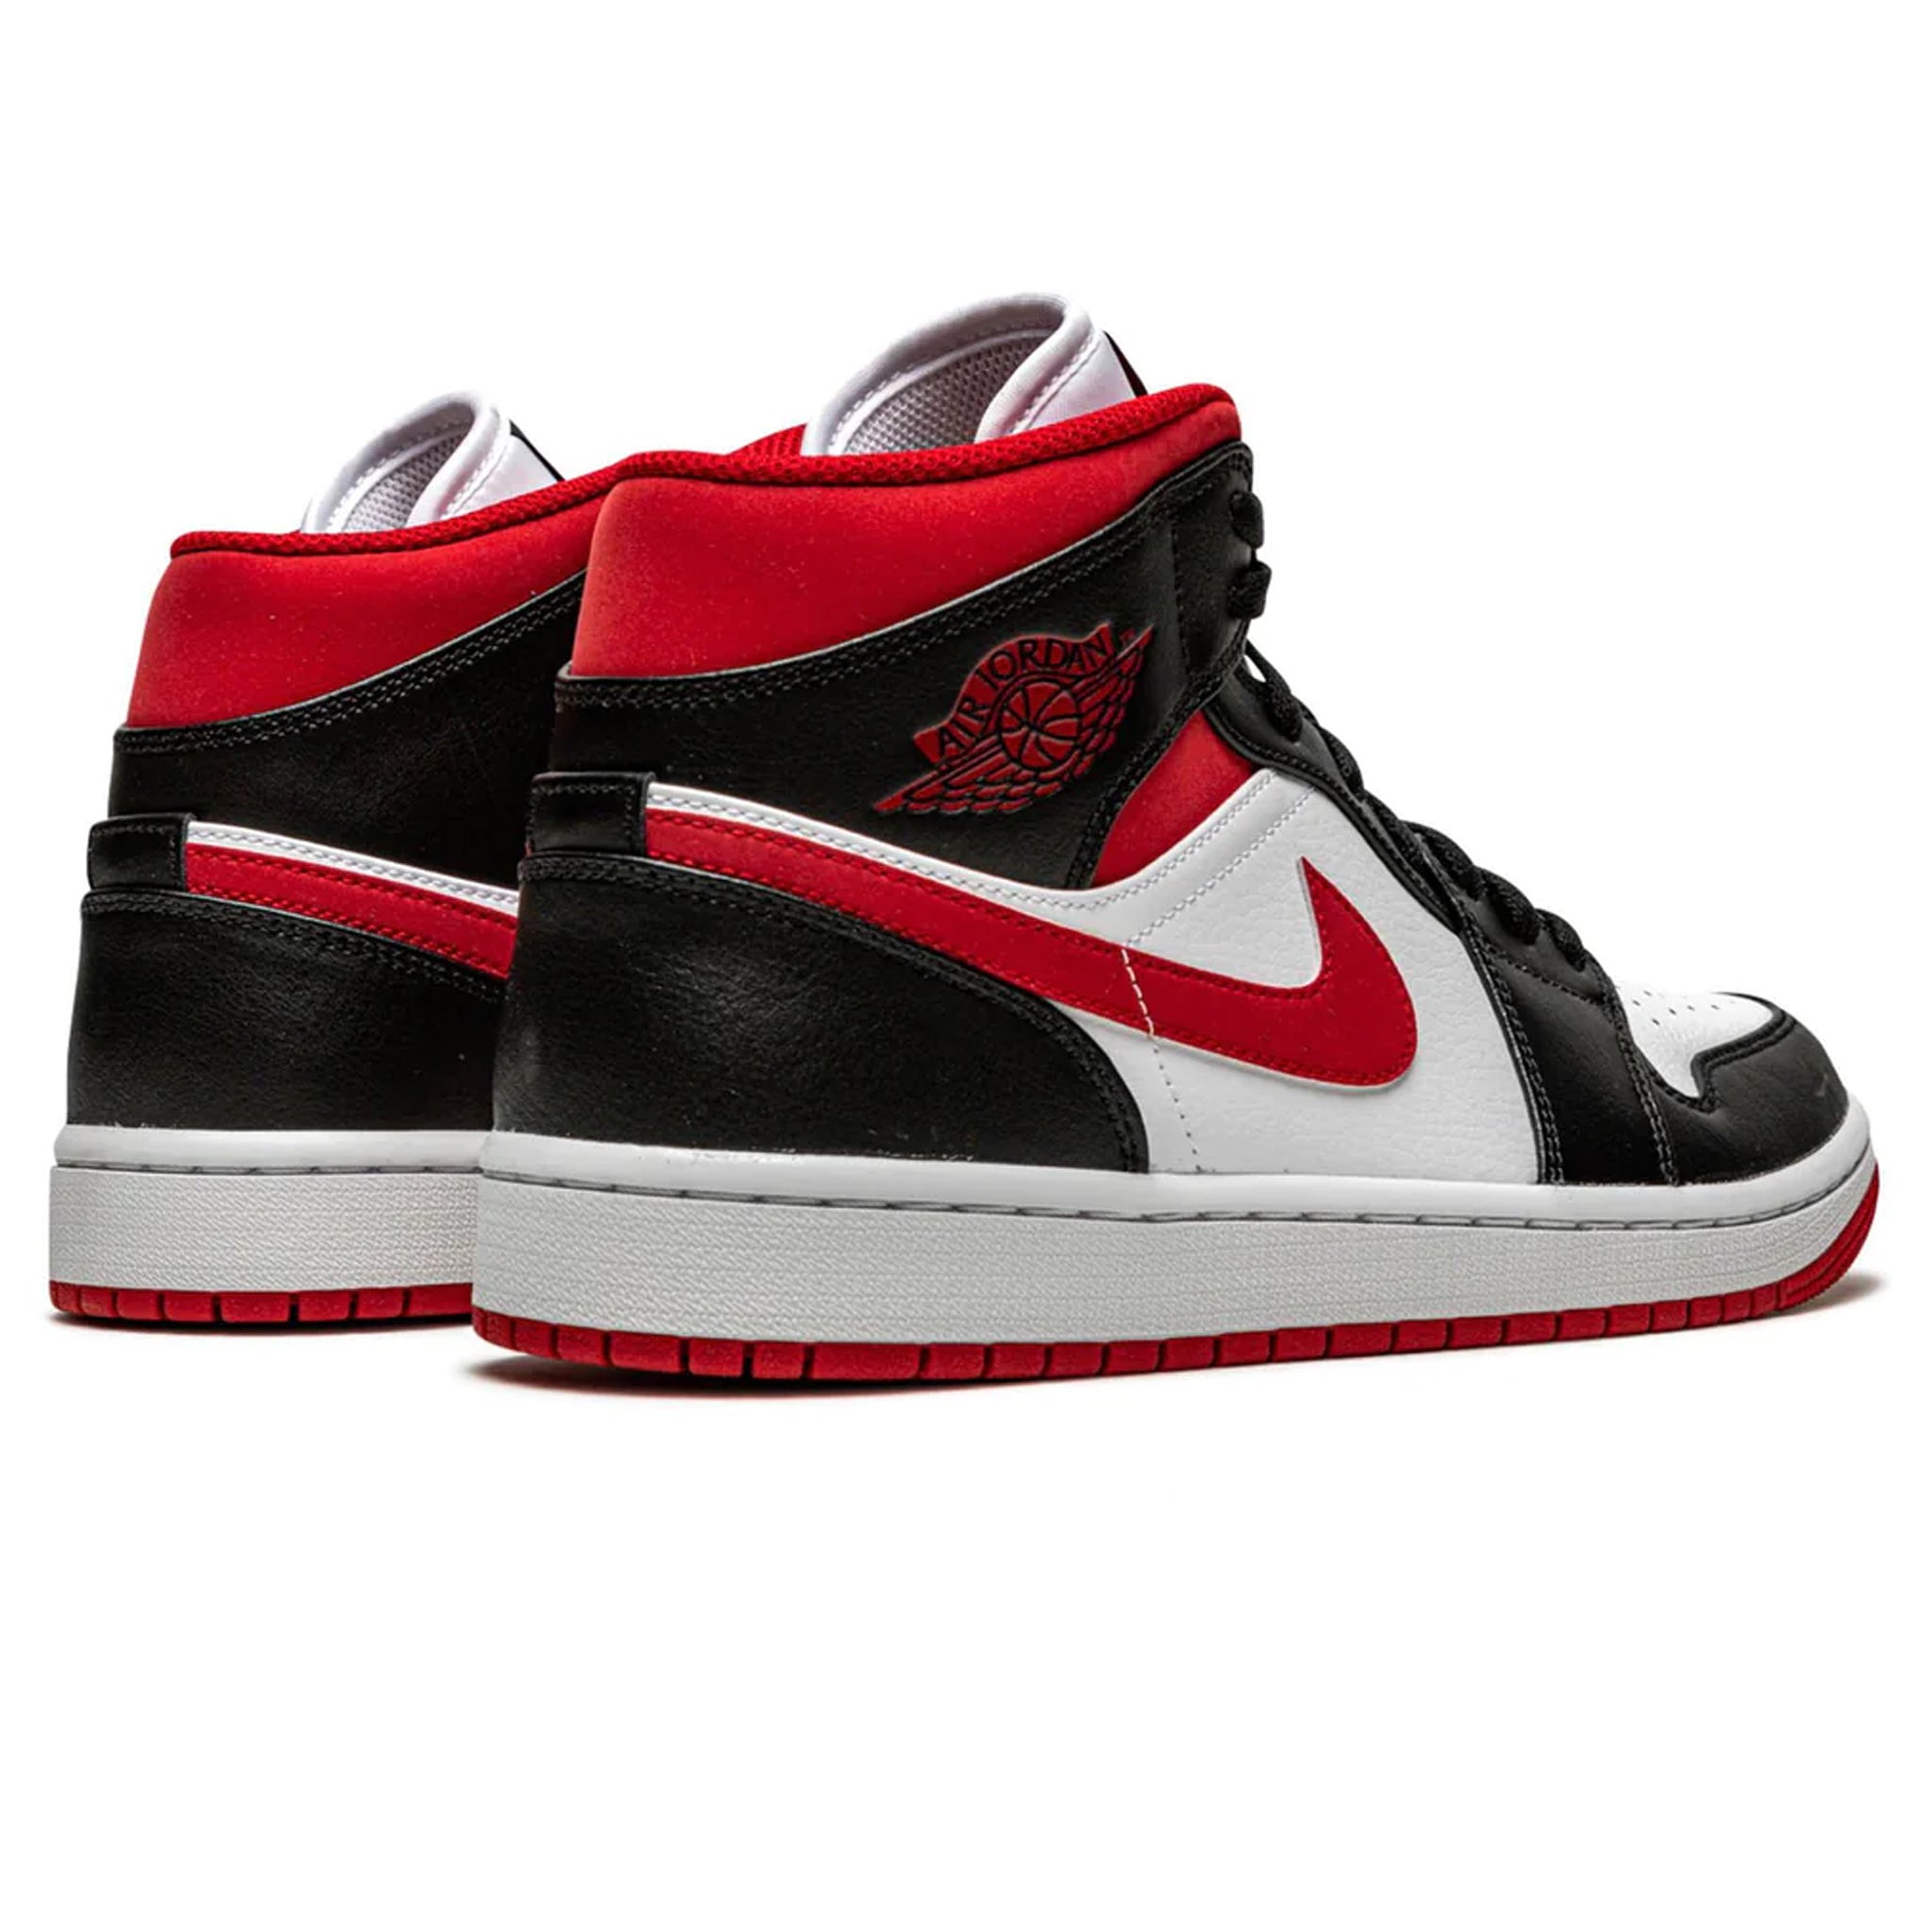 Side back view of Air Jordan 1 Mid Gym Red Black White 554724-122